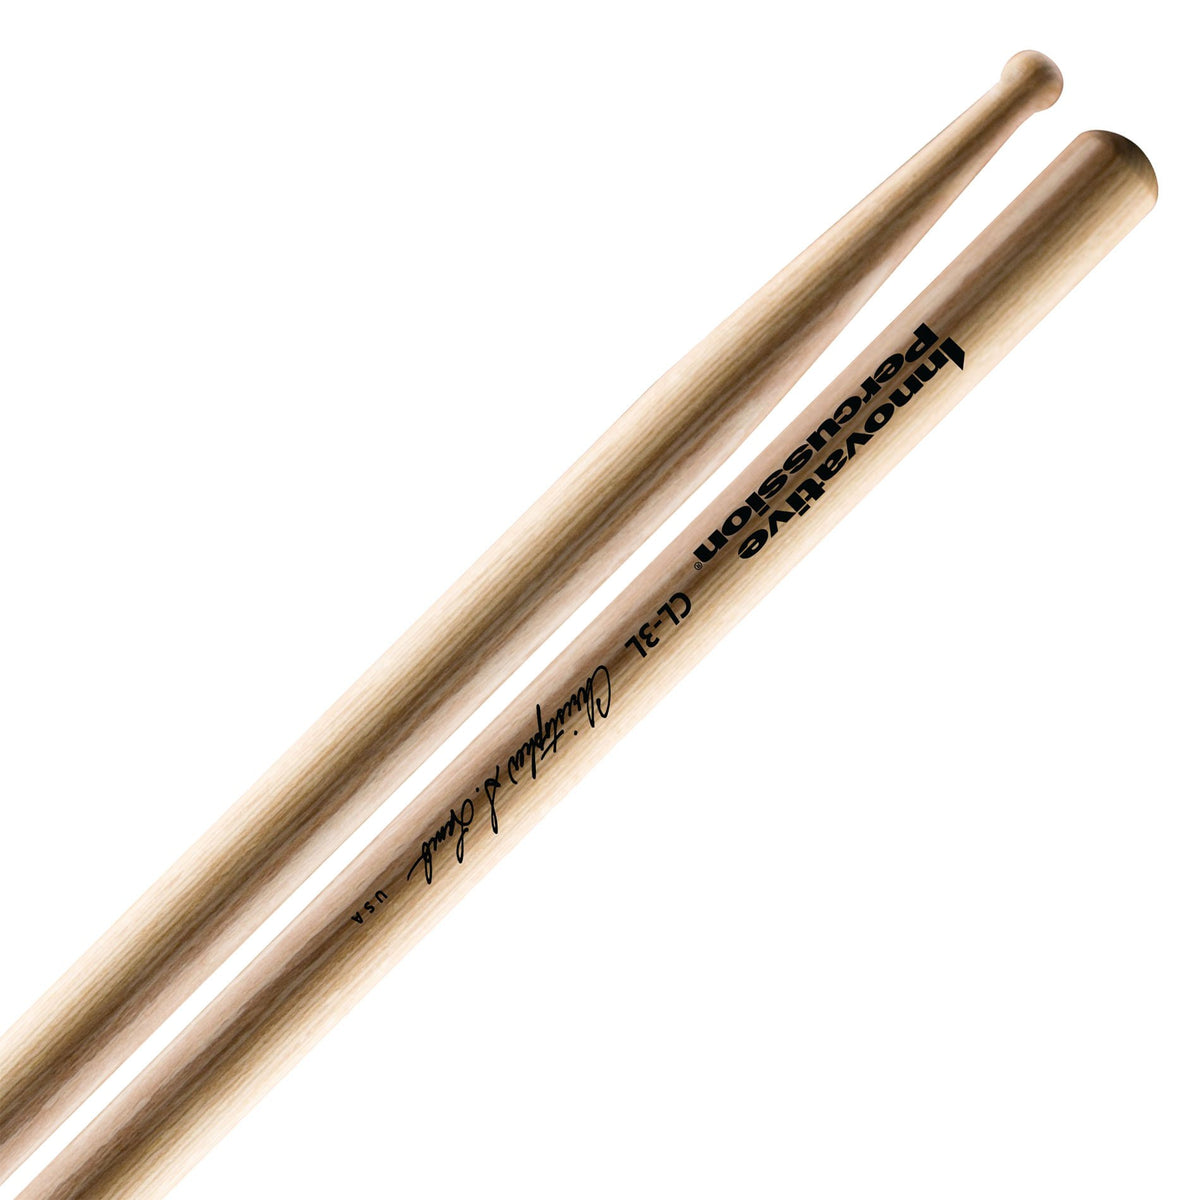 Innovative Percussion - Christopher Lamb Orchestral Series Concert Snare Drum Drumsticks